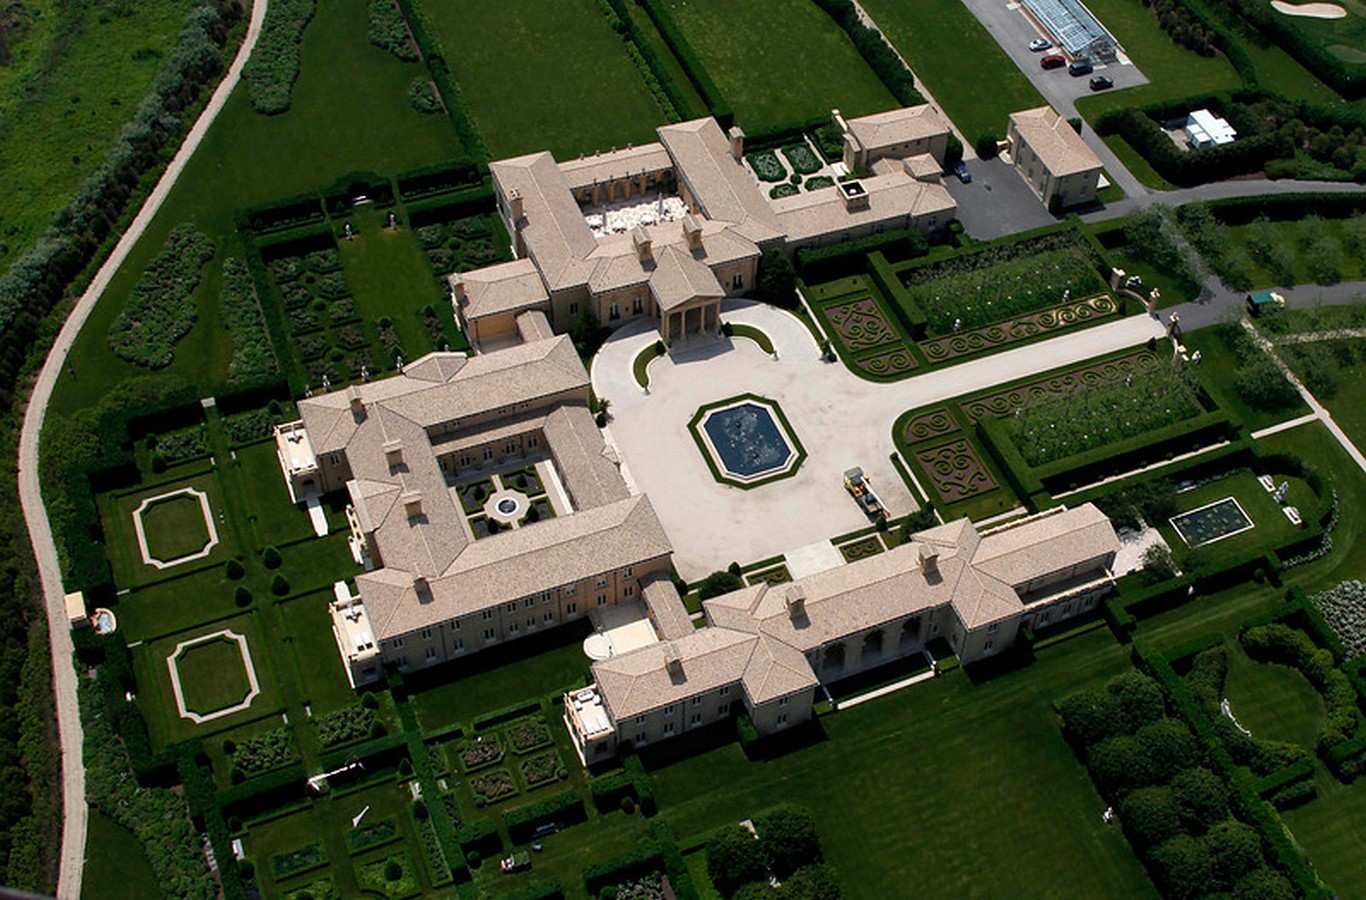 30 Biggest Houses In The World-Fairfield Pond, Hamptons - Sheet2